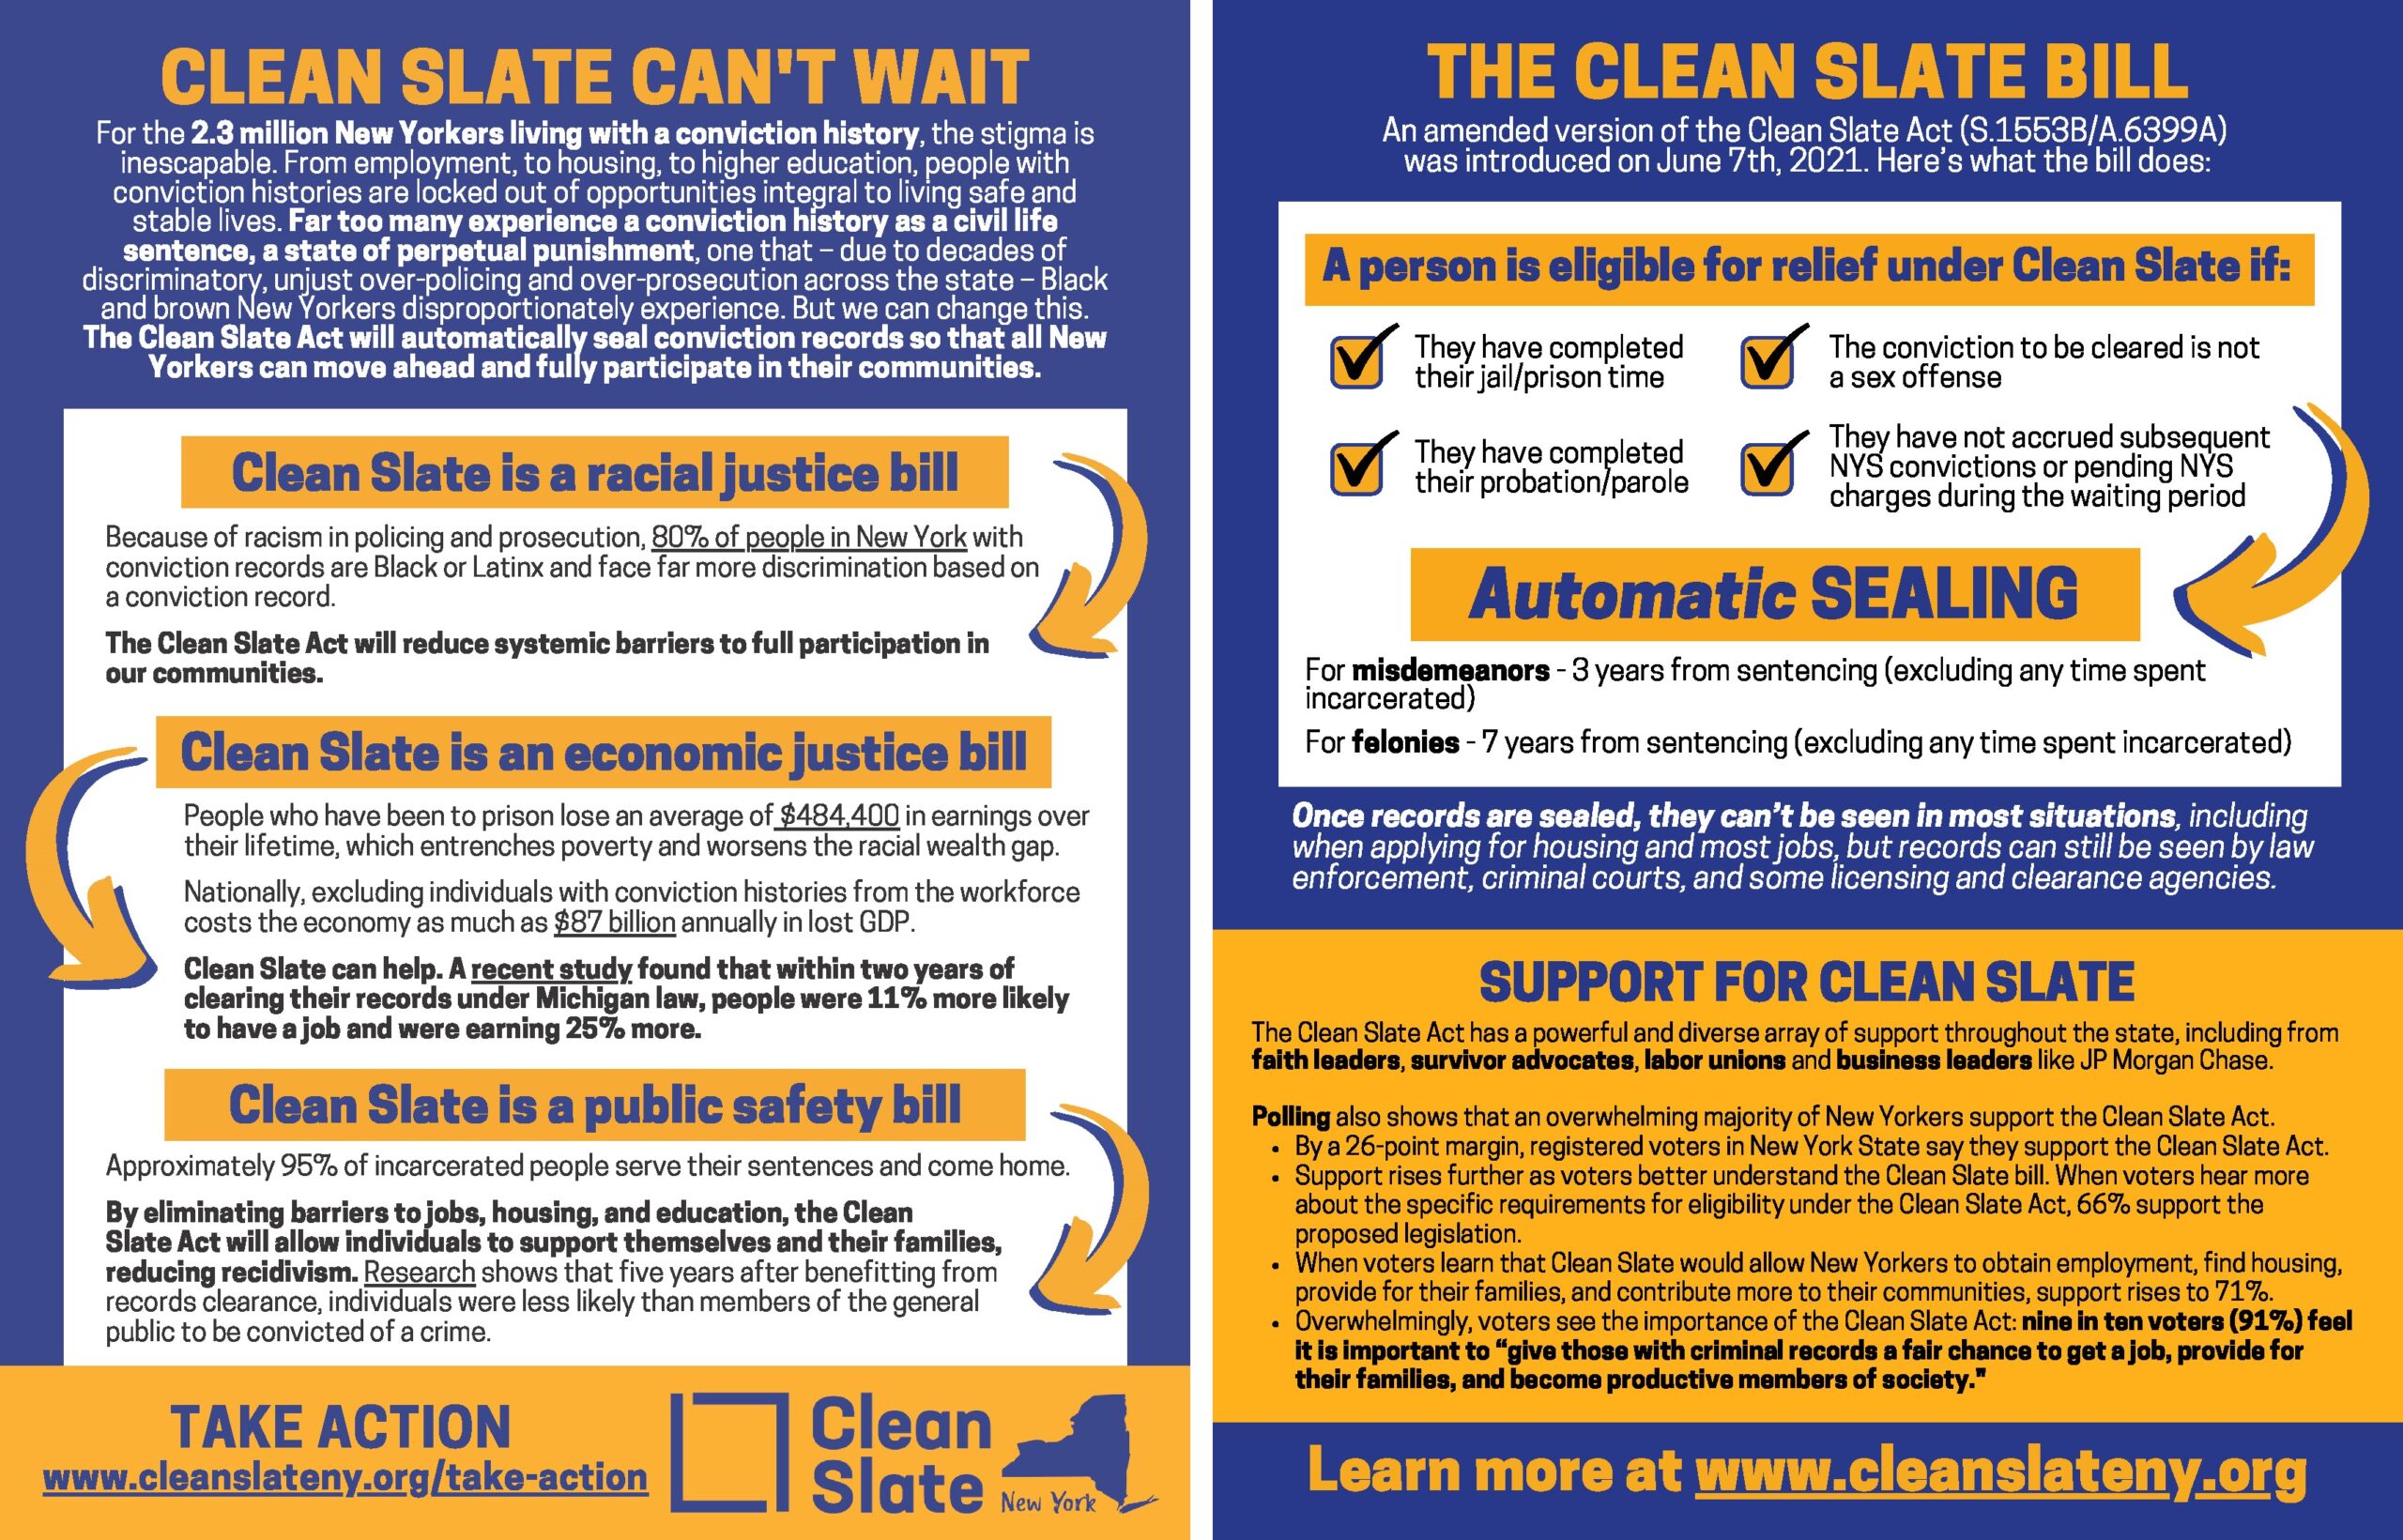 How will Clean Slate work? - Safe & Just Michigan